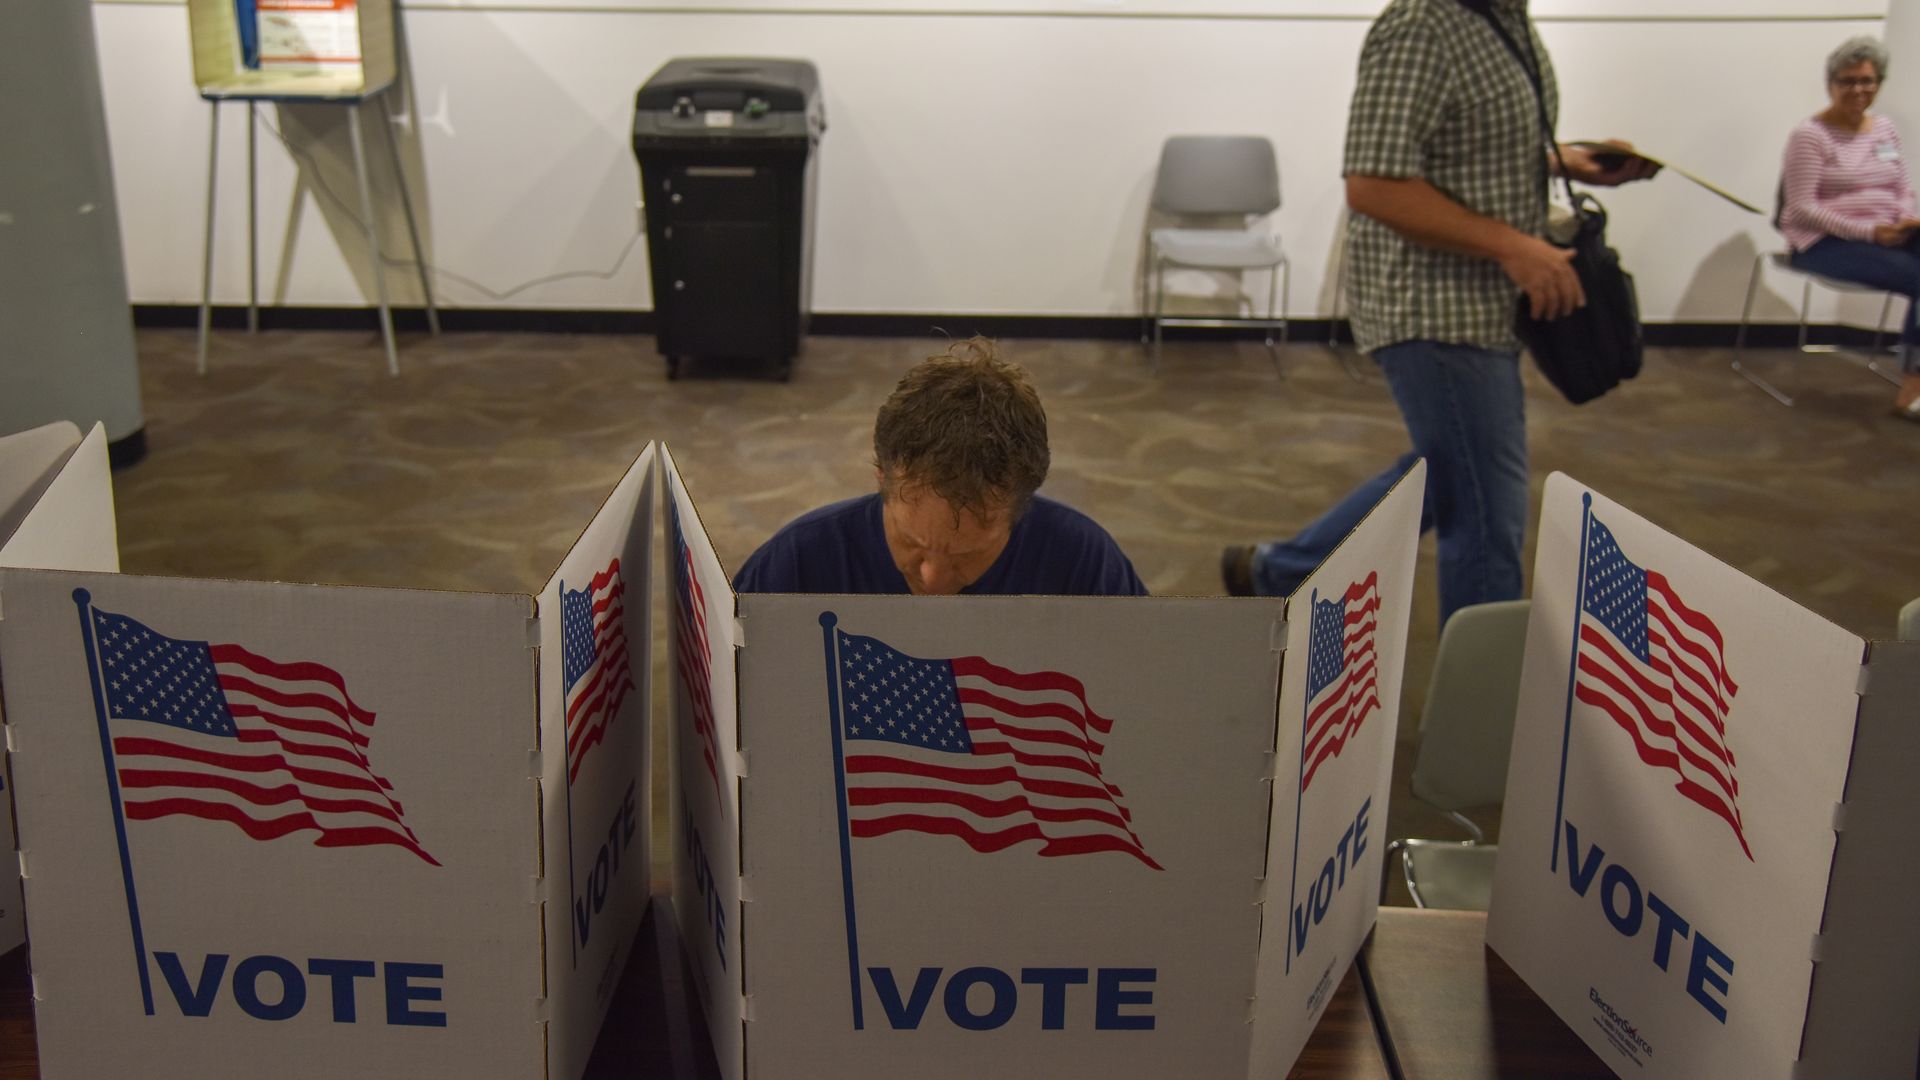 A person voting at the ballot box.